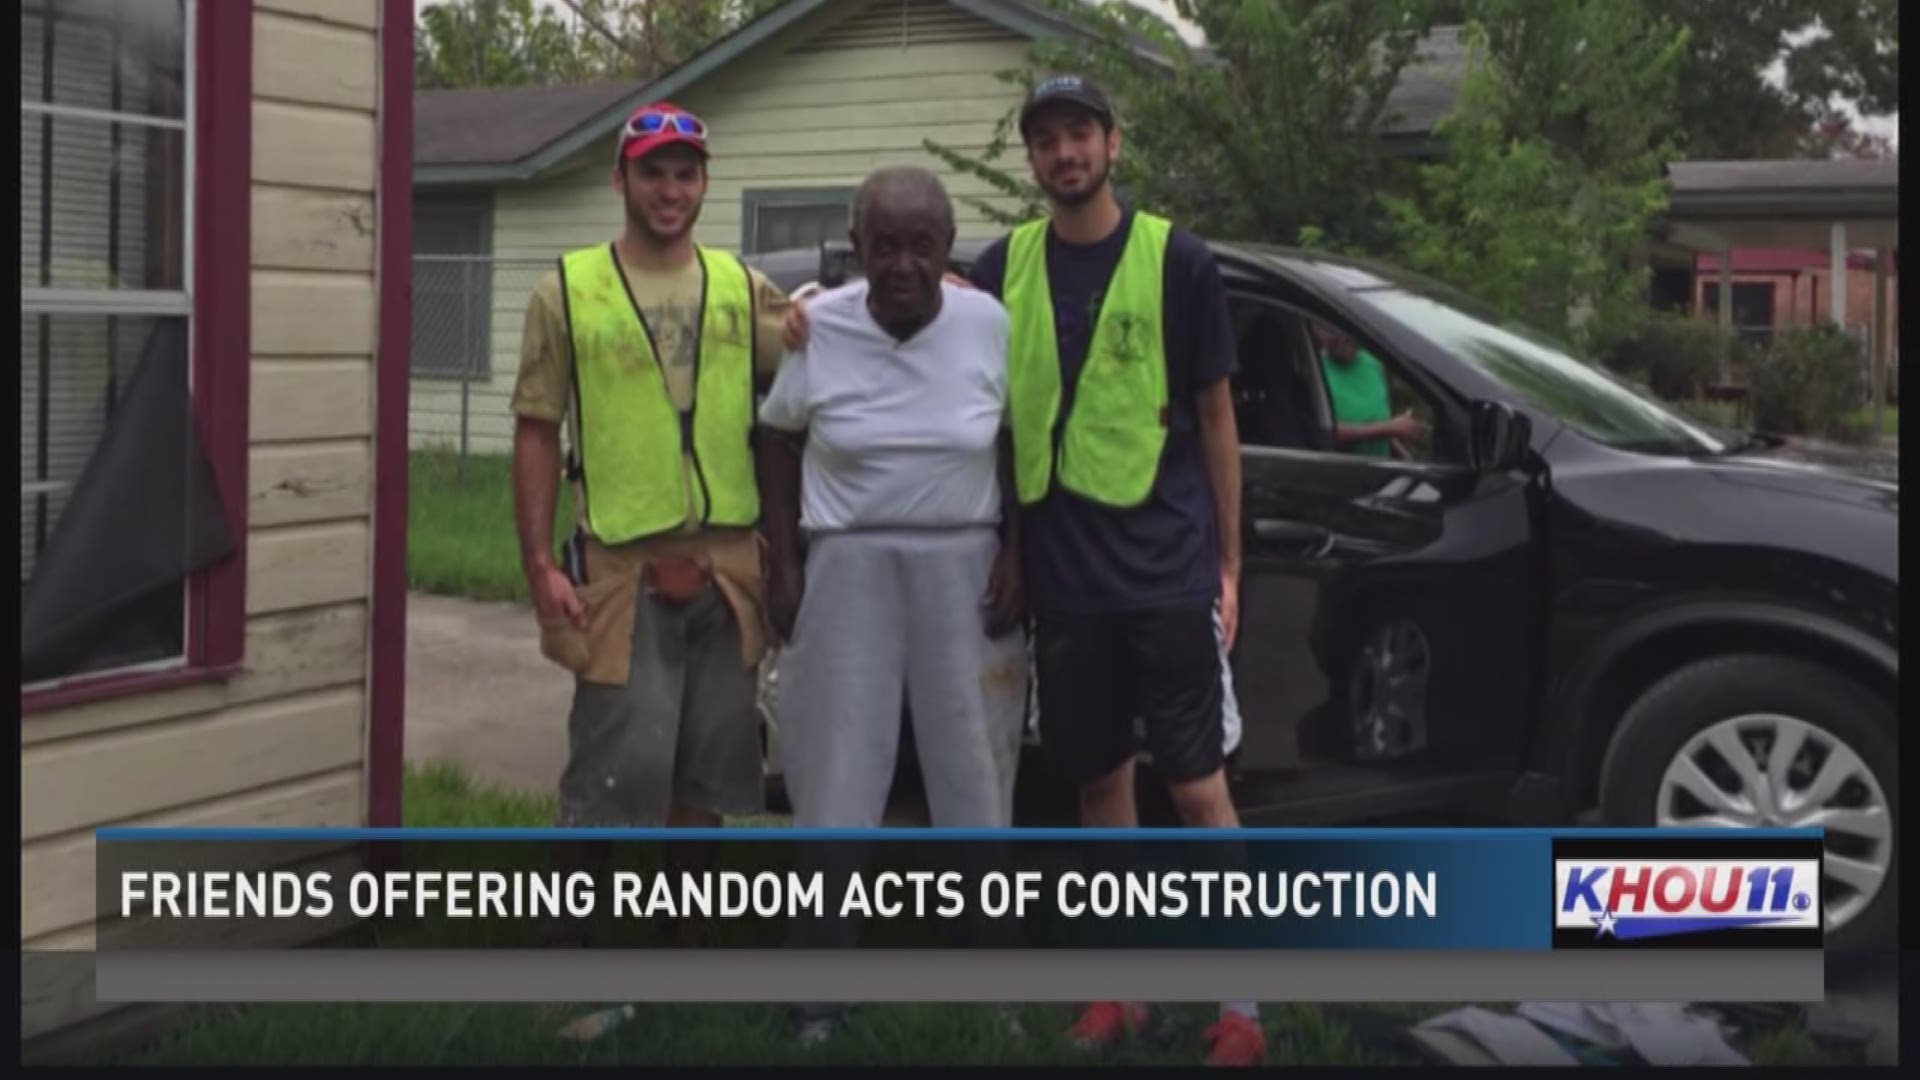 College students surprised an 85-year-old, disabled flood victim who lost his home.